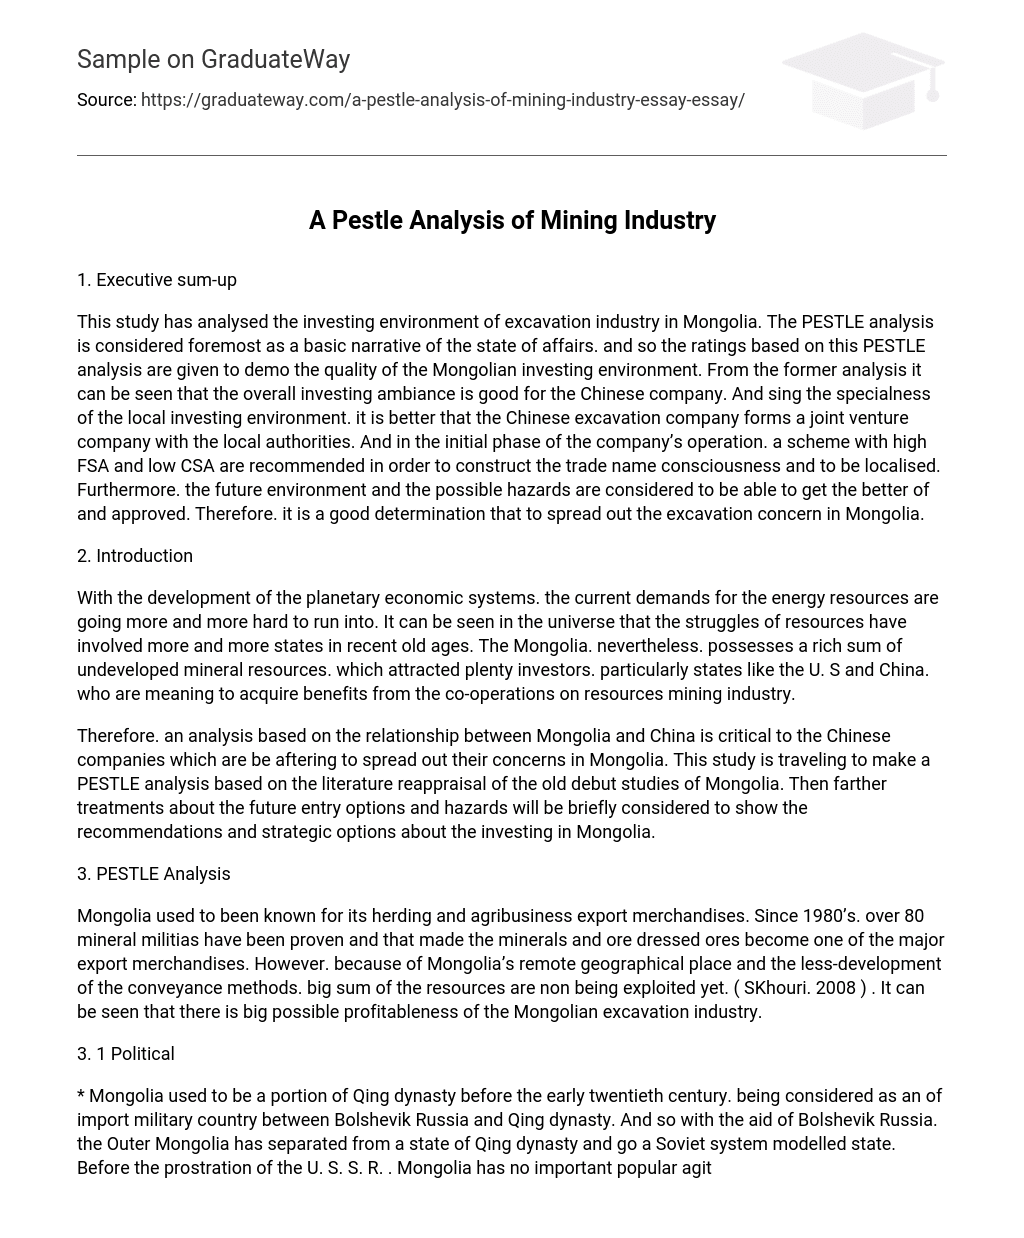 A Pestle Analysis of Mining Industry